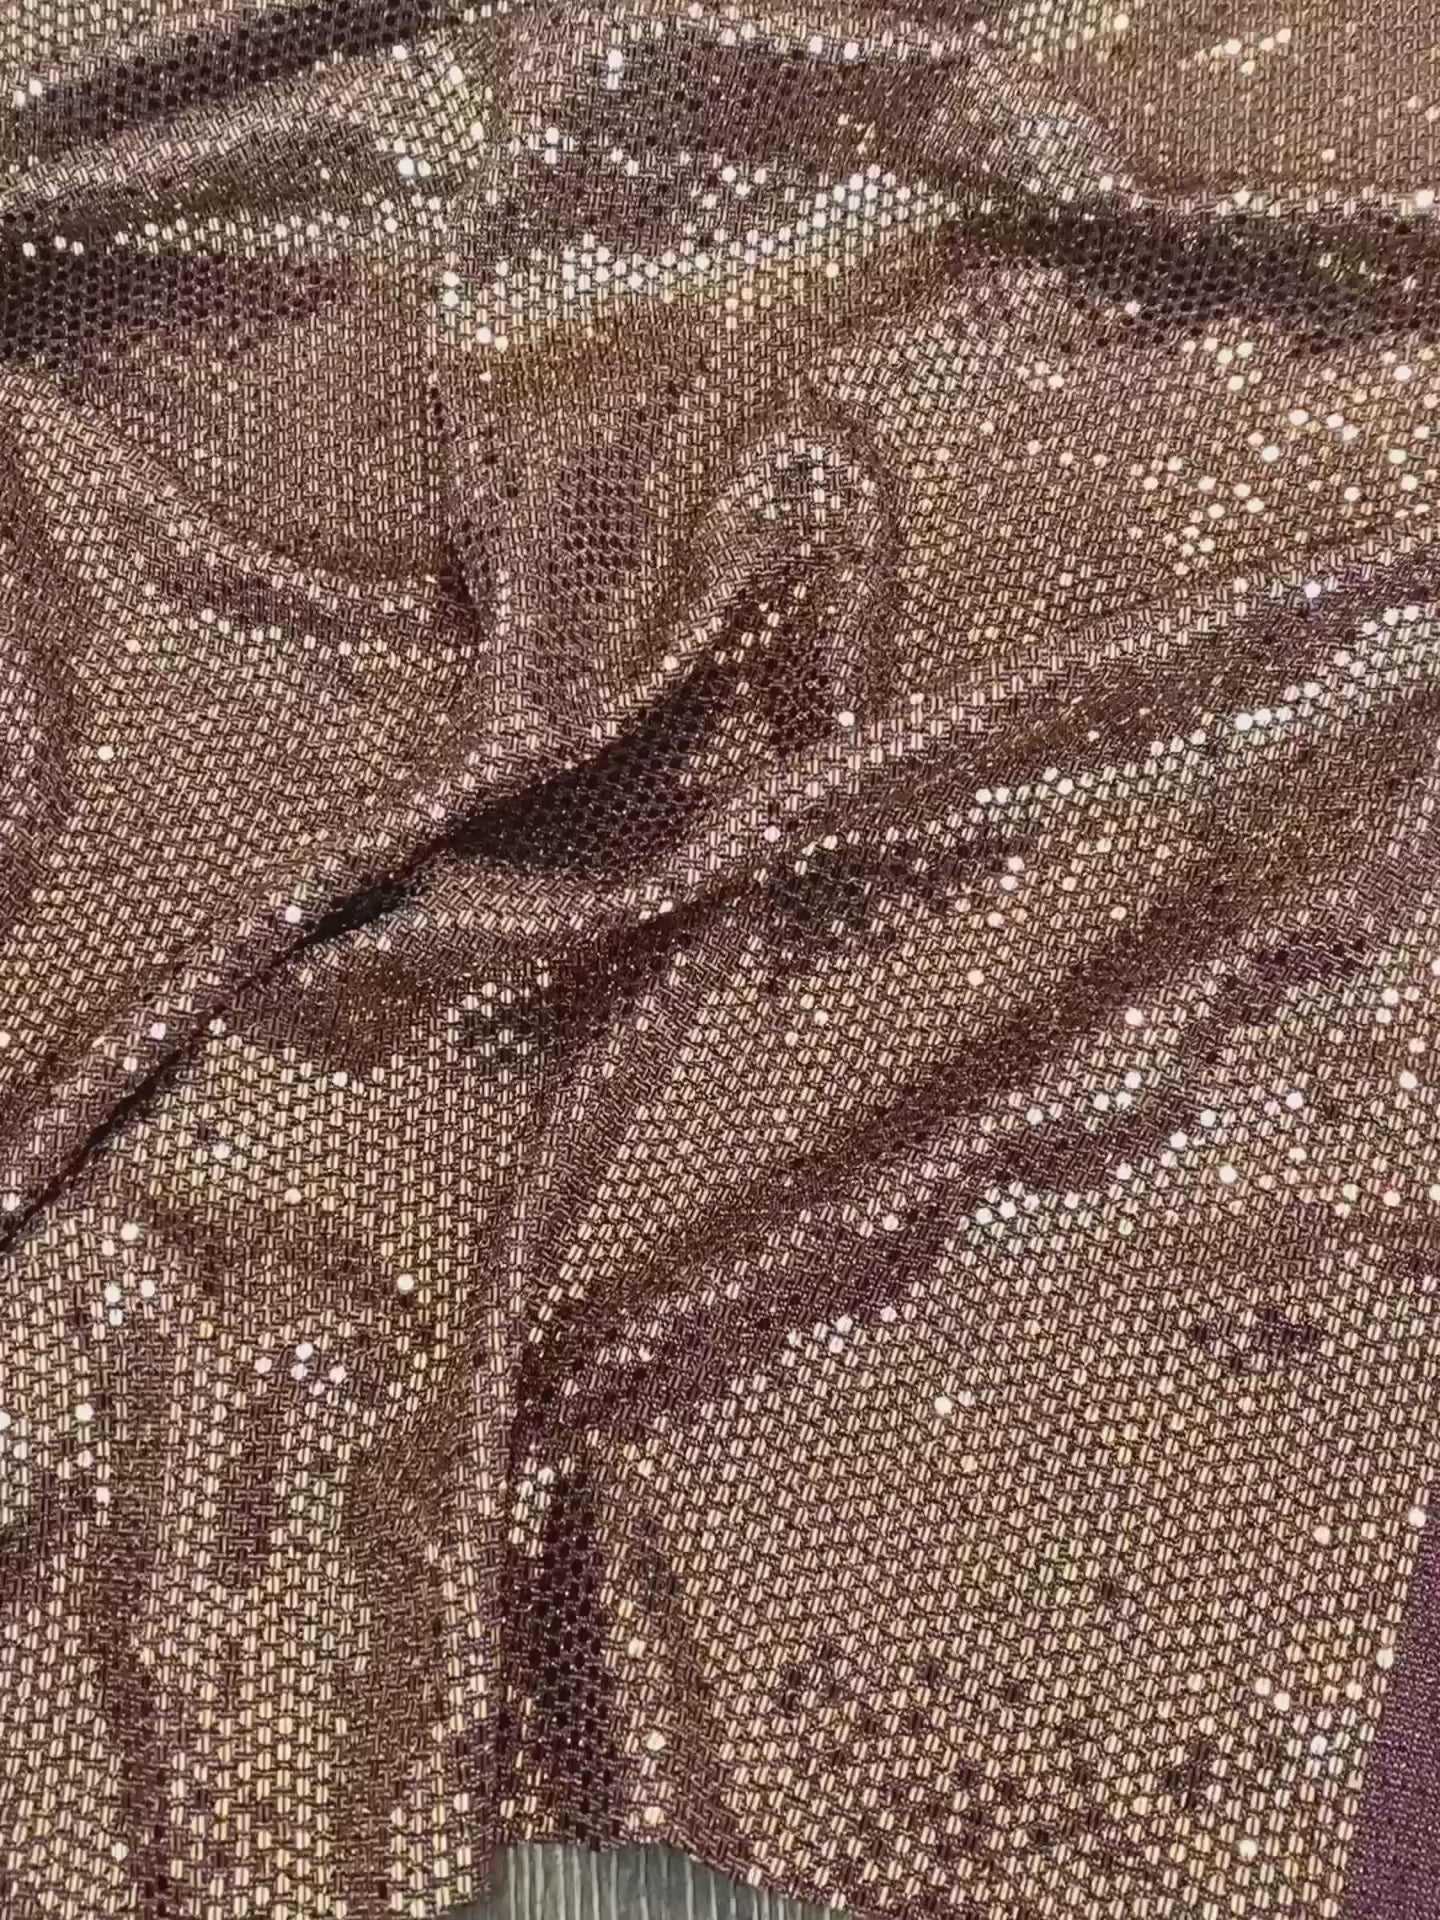 Gold Flat Mirror Stretch Sequin Knit, sequin knit on discount. gold sequin, stretch sequin knit, flat mirror nsequin material, mirror sequin knit for brides, stretch sequin fabric by the yard, gold sequin knit fabric dress